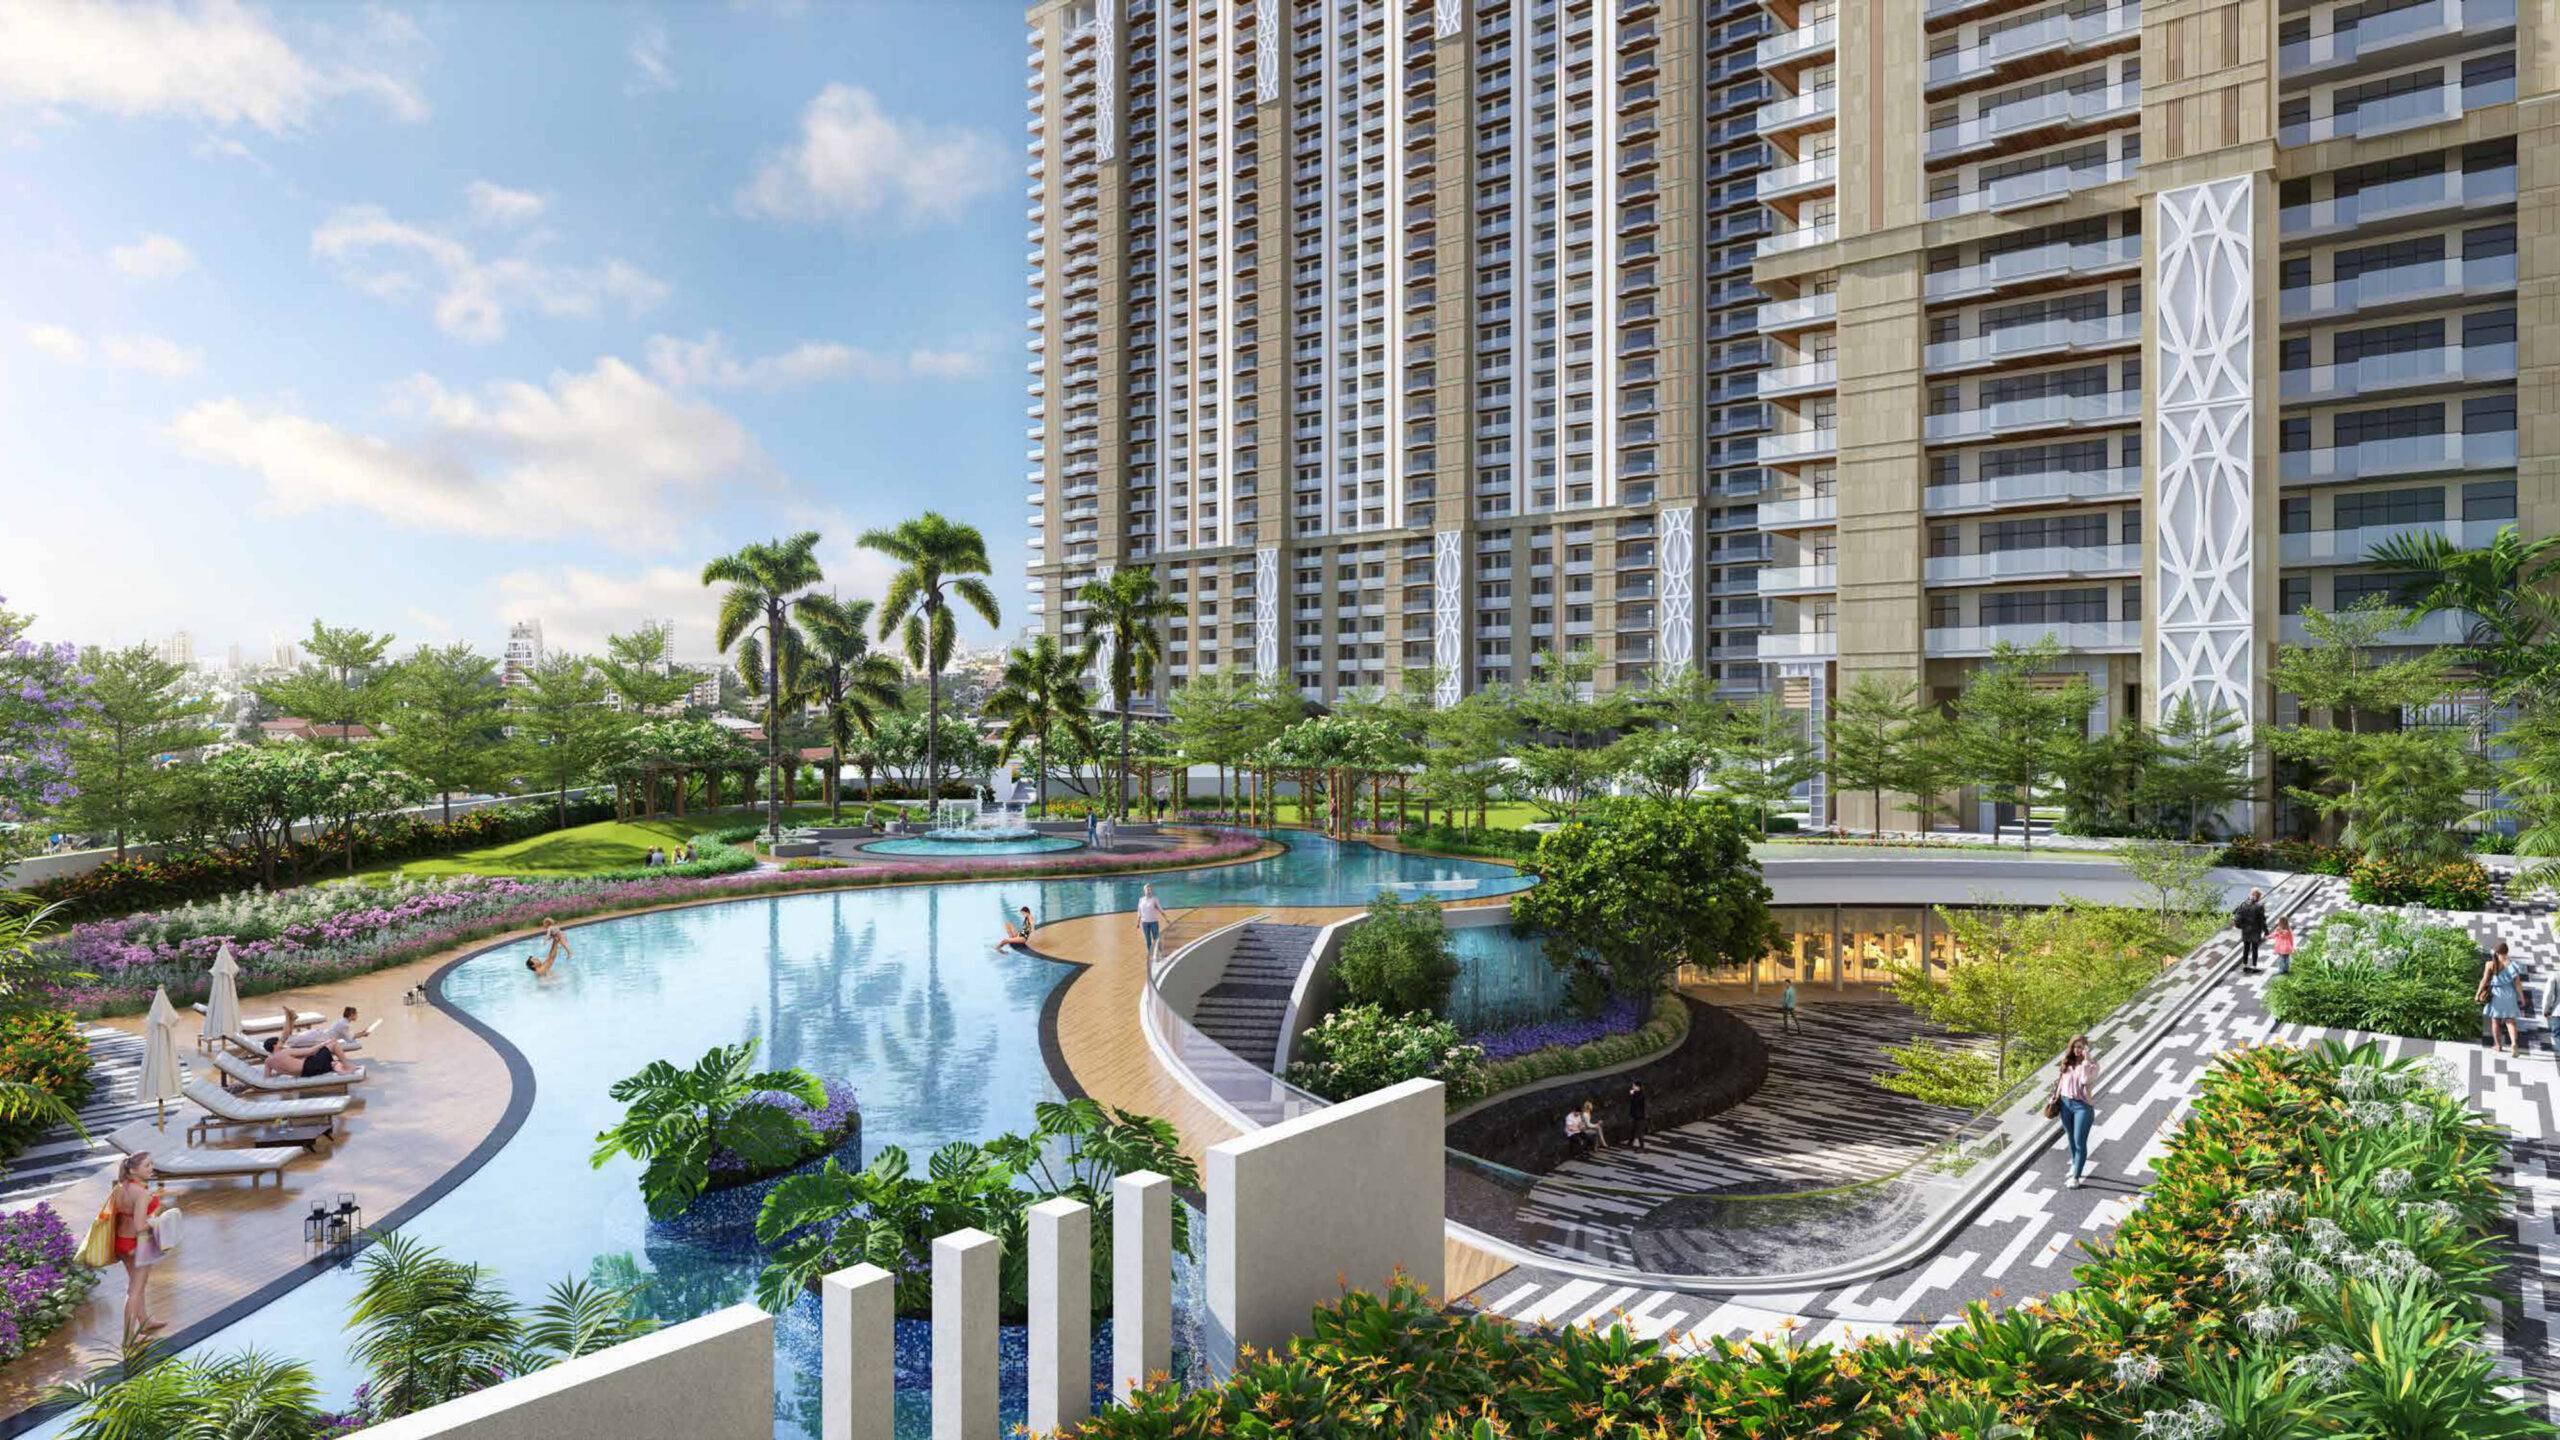 Whiteland the Aspen Gurgaon a Great Investment Opportunity